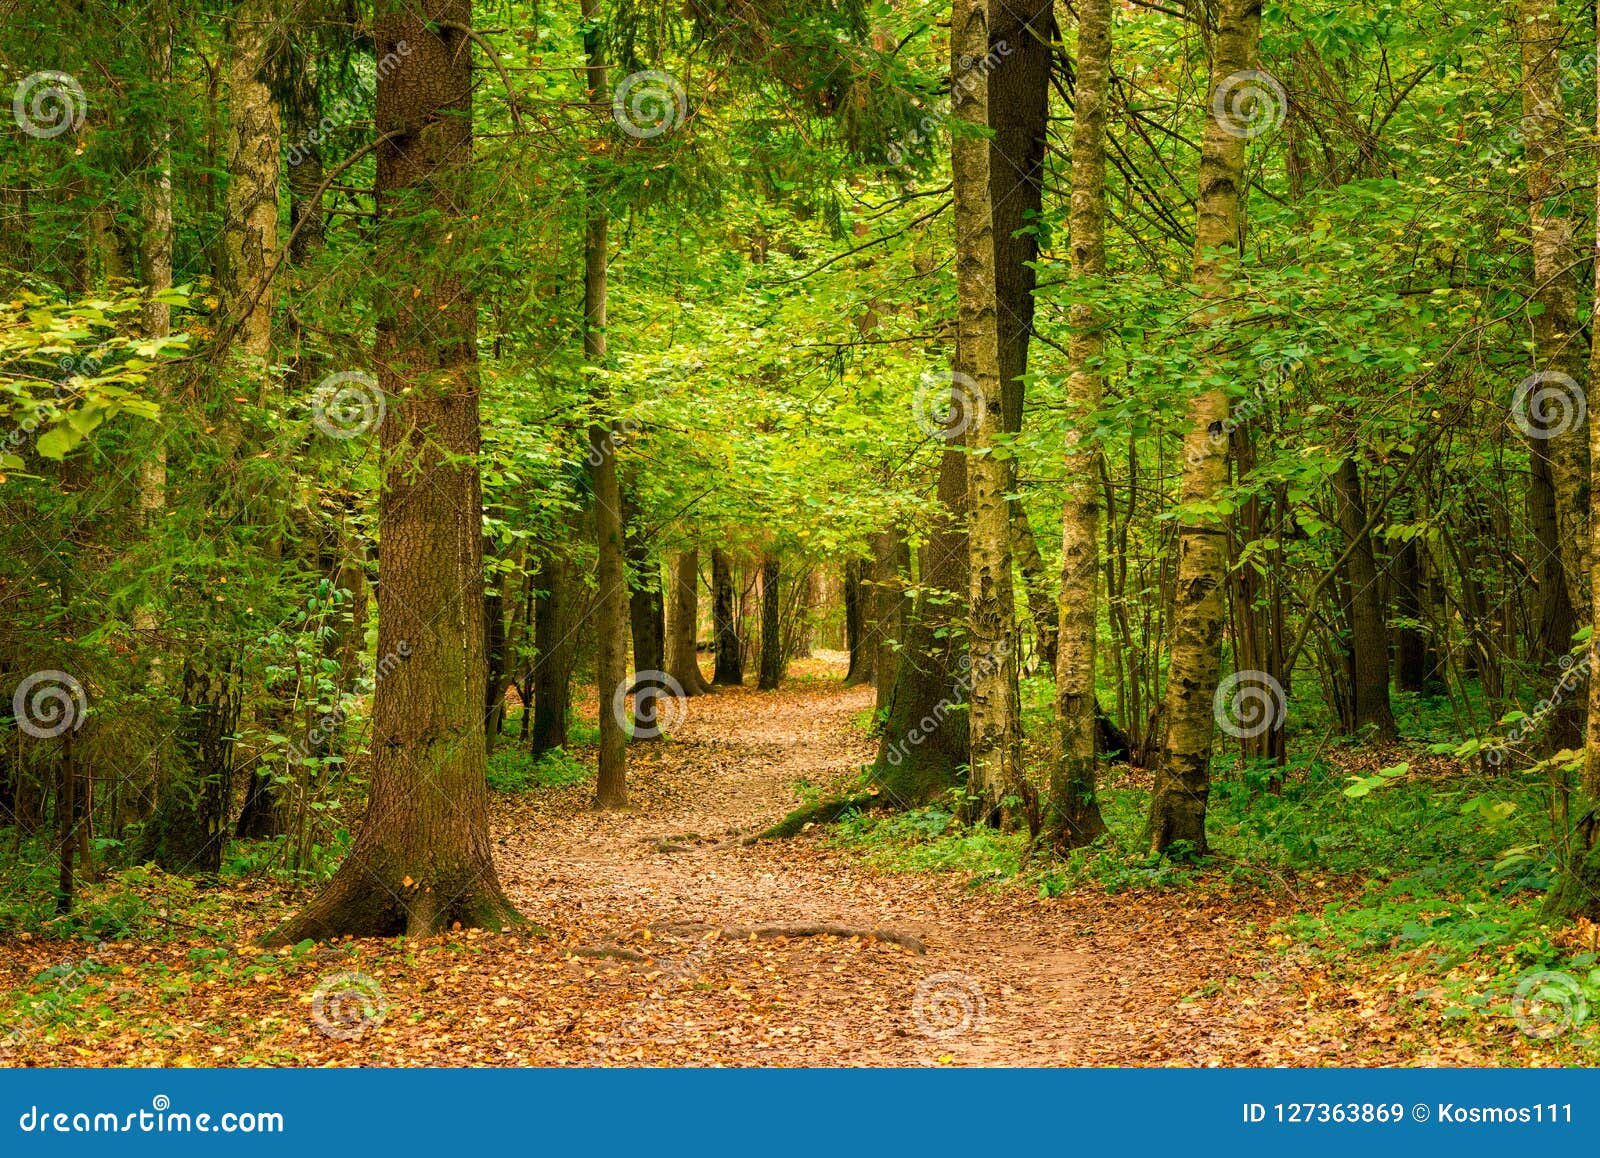 september, autumn landscape in the forest, trees